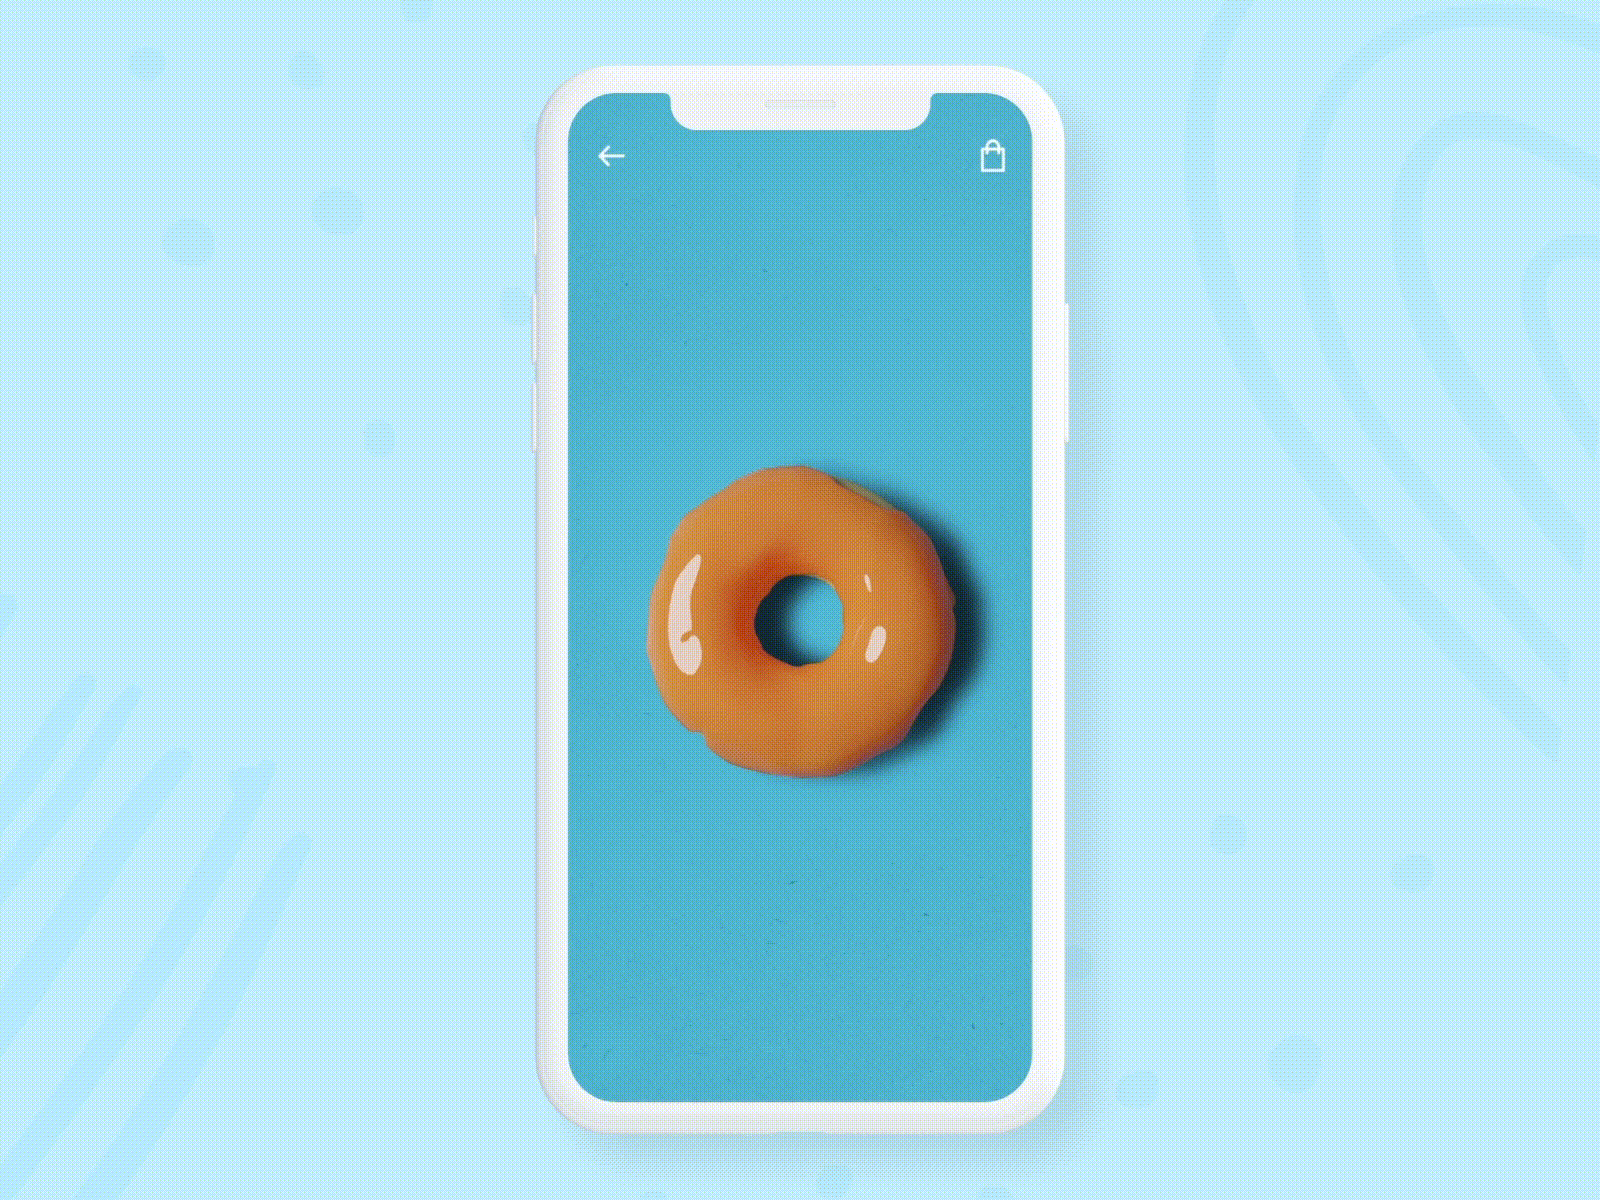 Donut Product Page